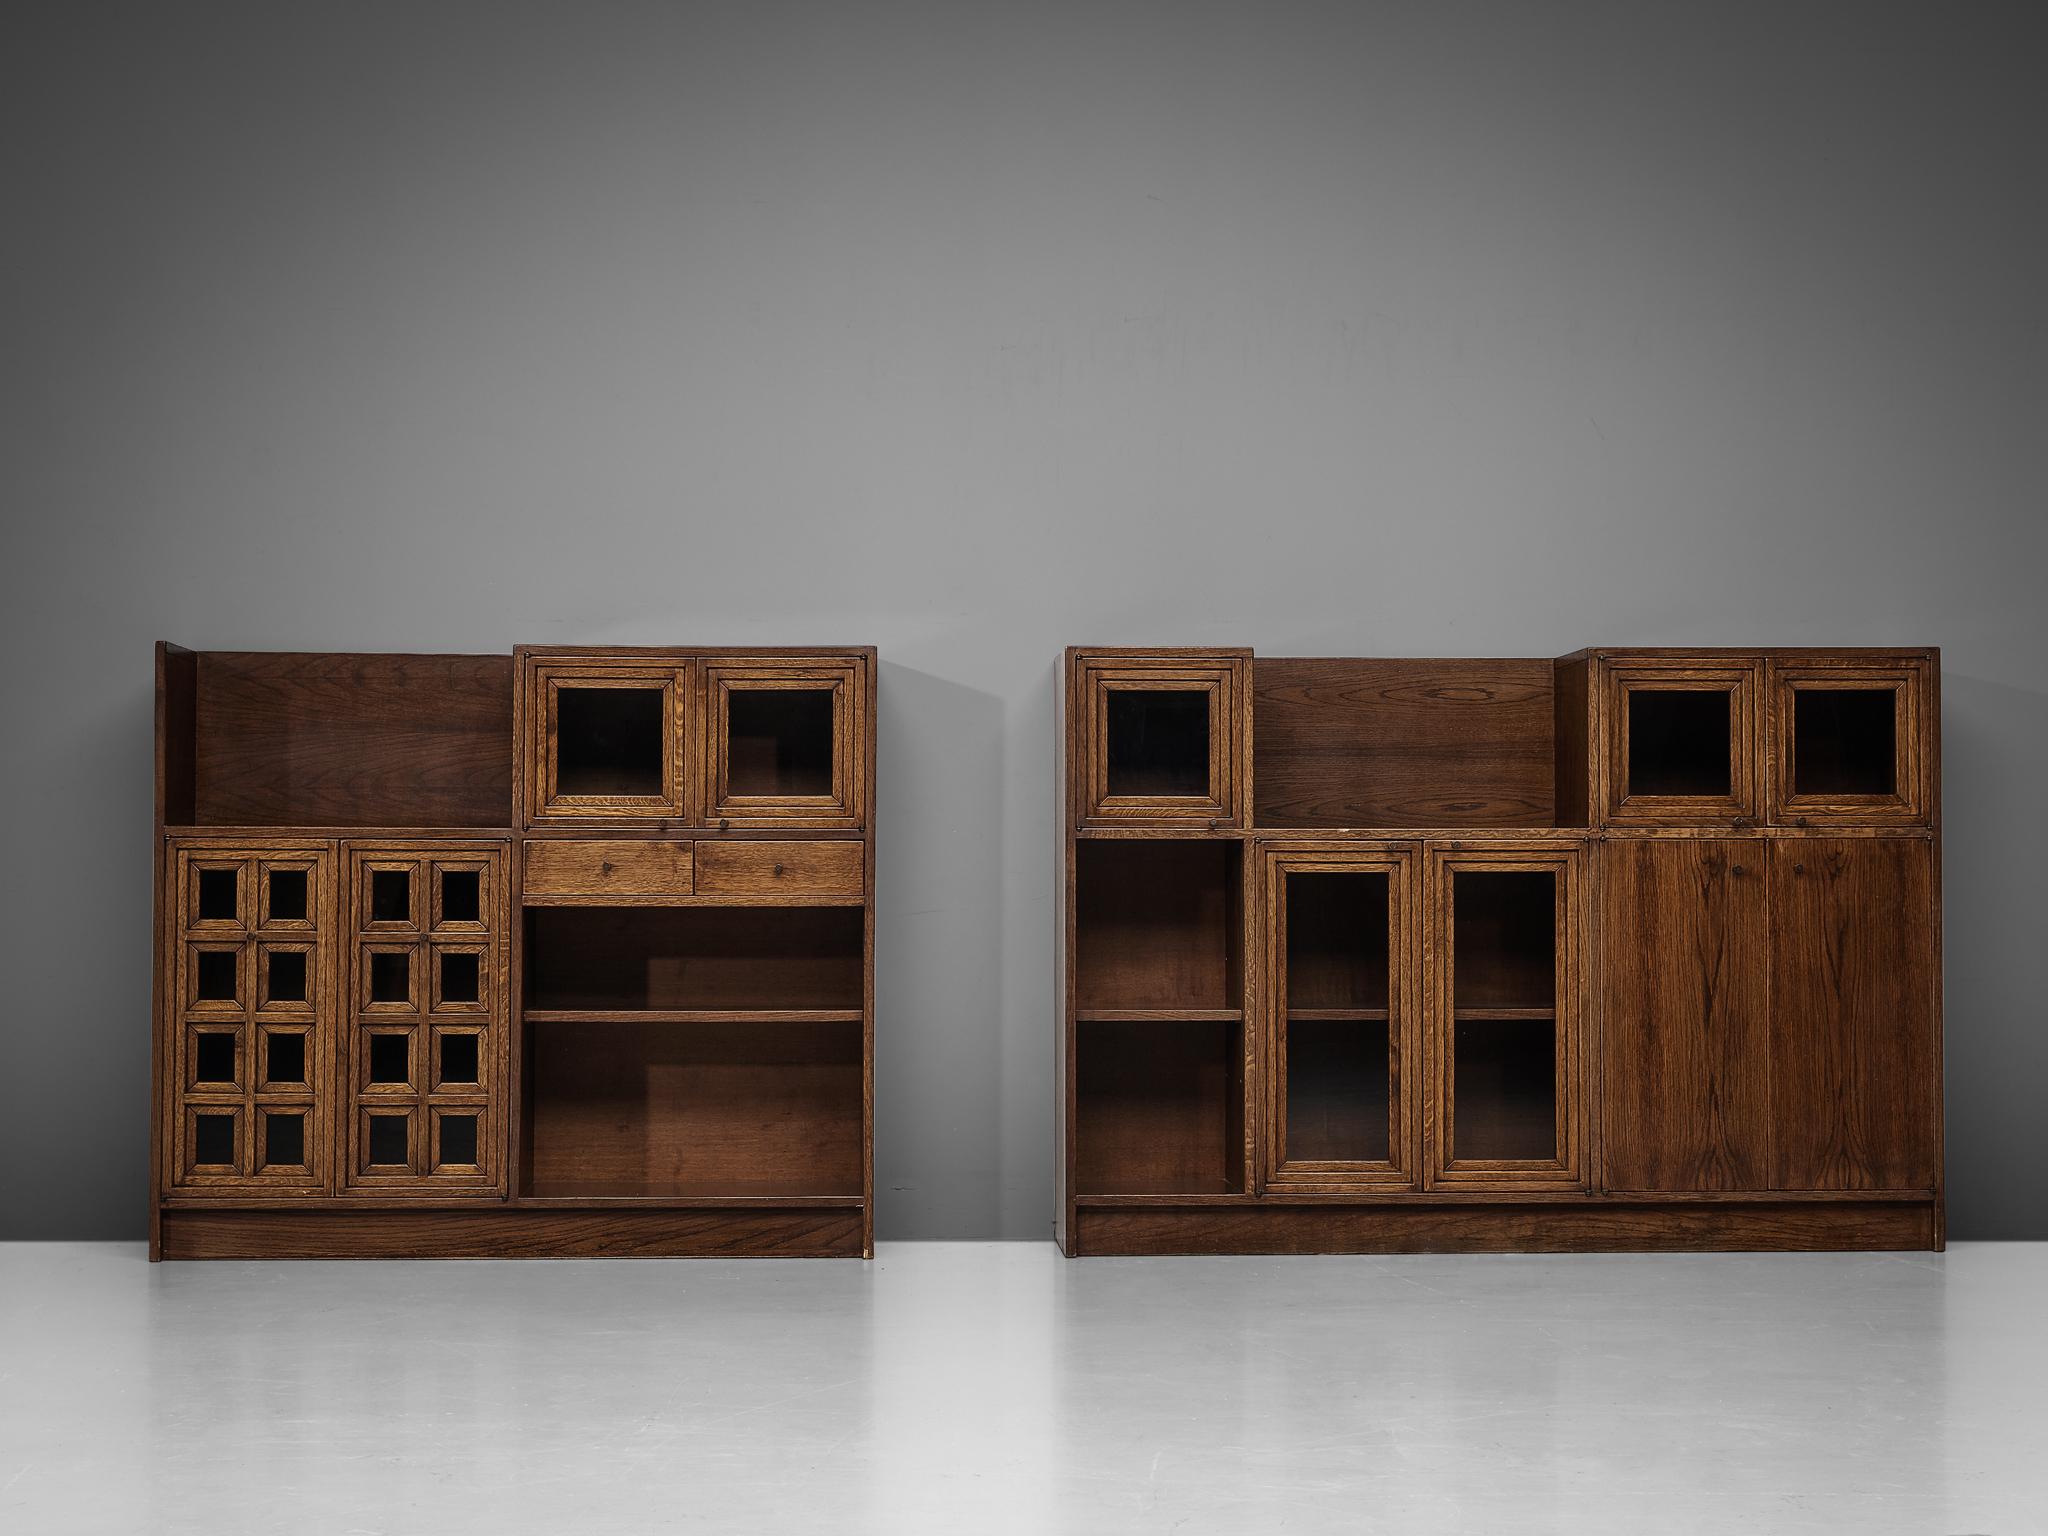 Giuseppe Rivadossi, cabinets, oak, glass, Italy, 1975.

An exceptional pair of cabinets by the Italian sculptor and designer Giuseppe Rivadossi, featuring a high level of craftsmanship in woodwork. The two pieces combined create a wonderful wall